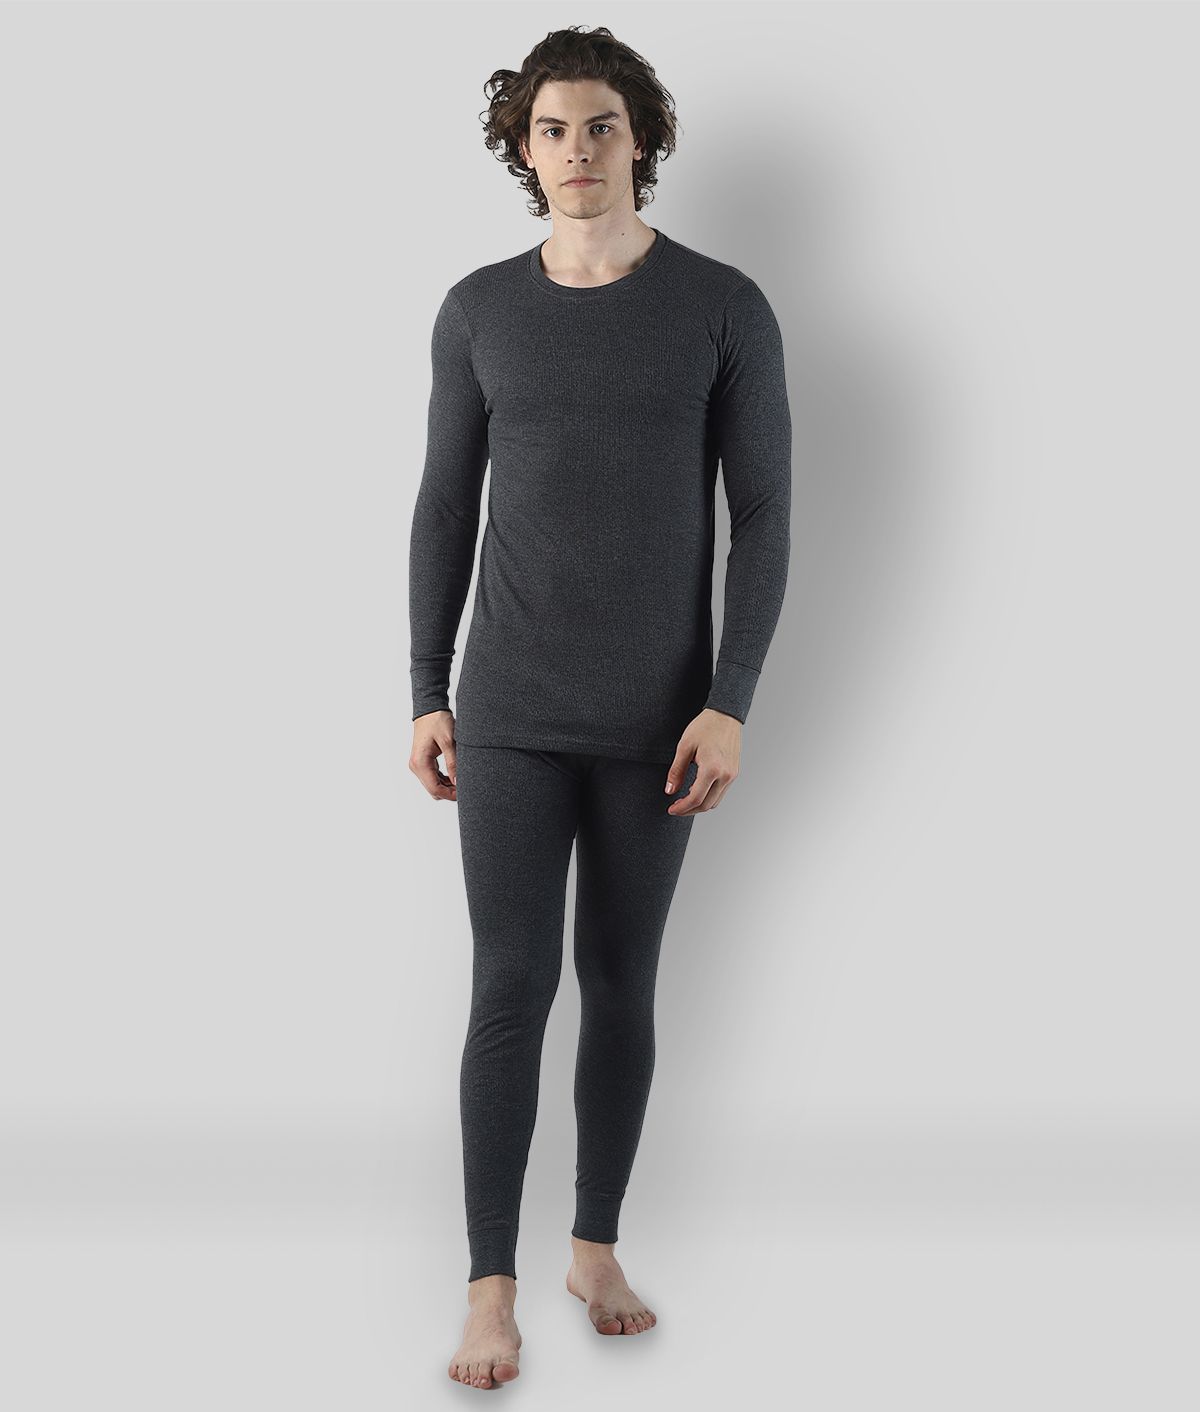     			Force NXT - Grey Cotton Blend Men's Thermal Sets ( Pack of 1 )